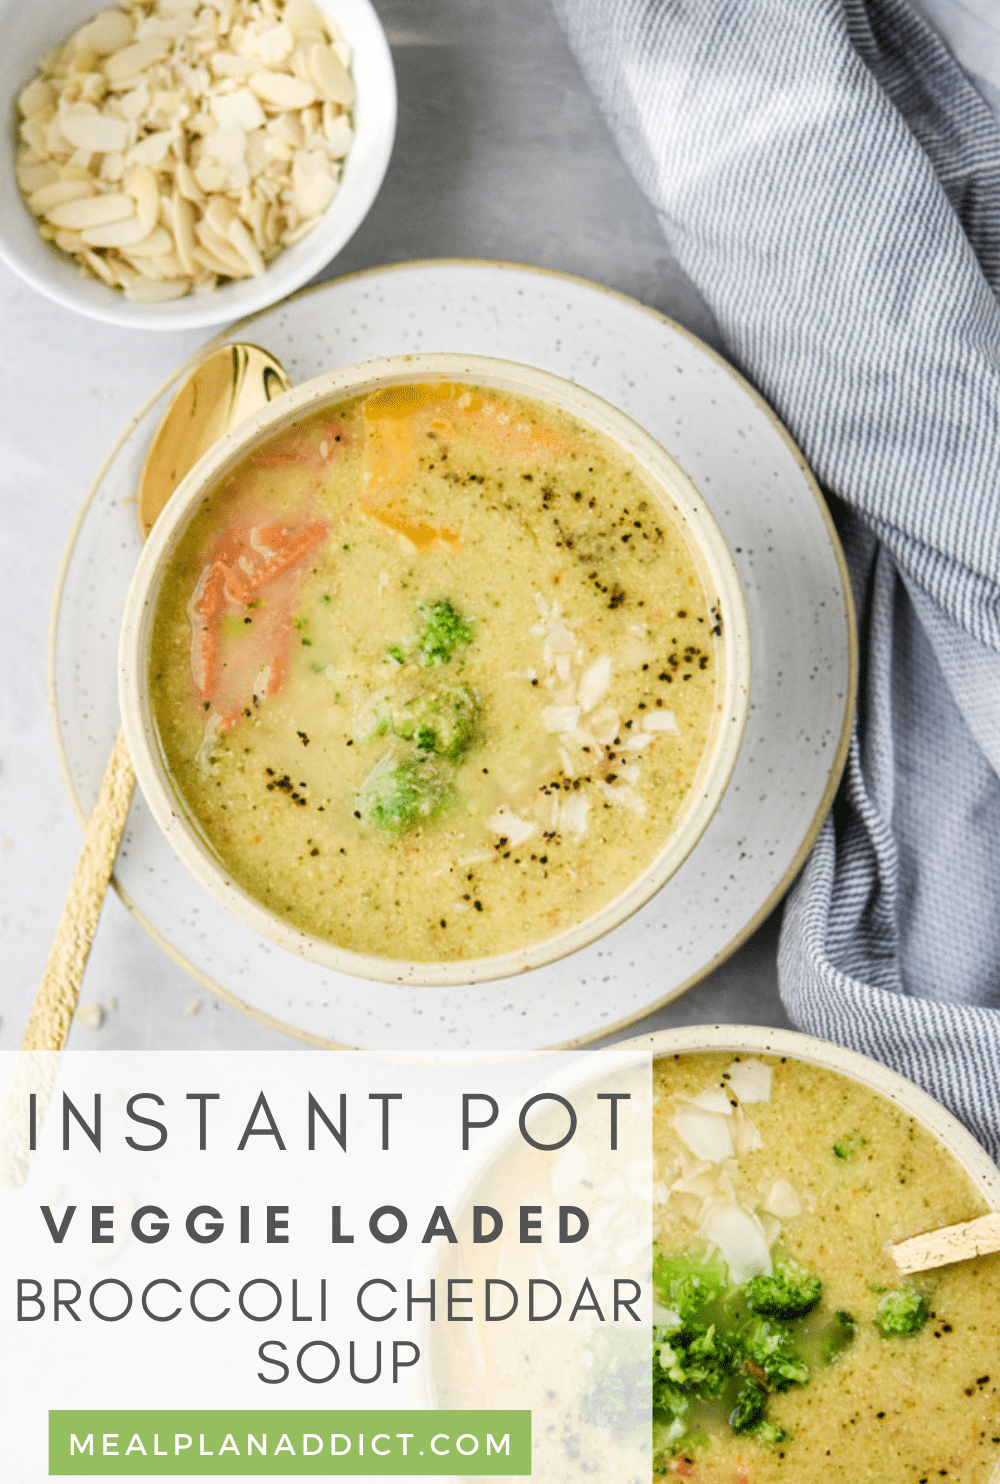 Broccoli cheddar soup pin for Pinterest